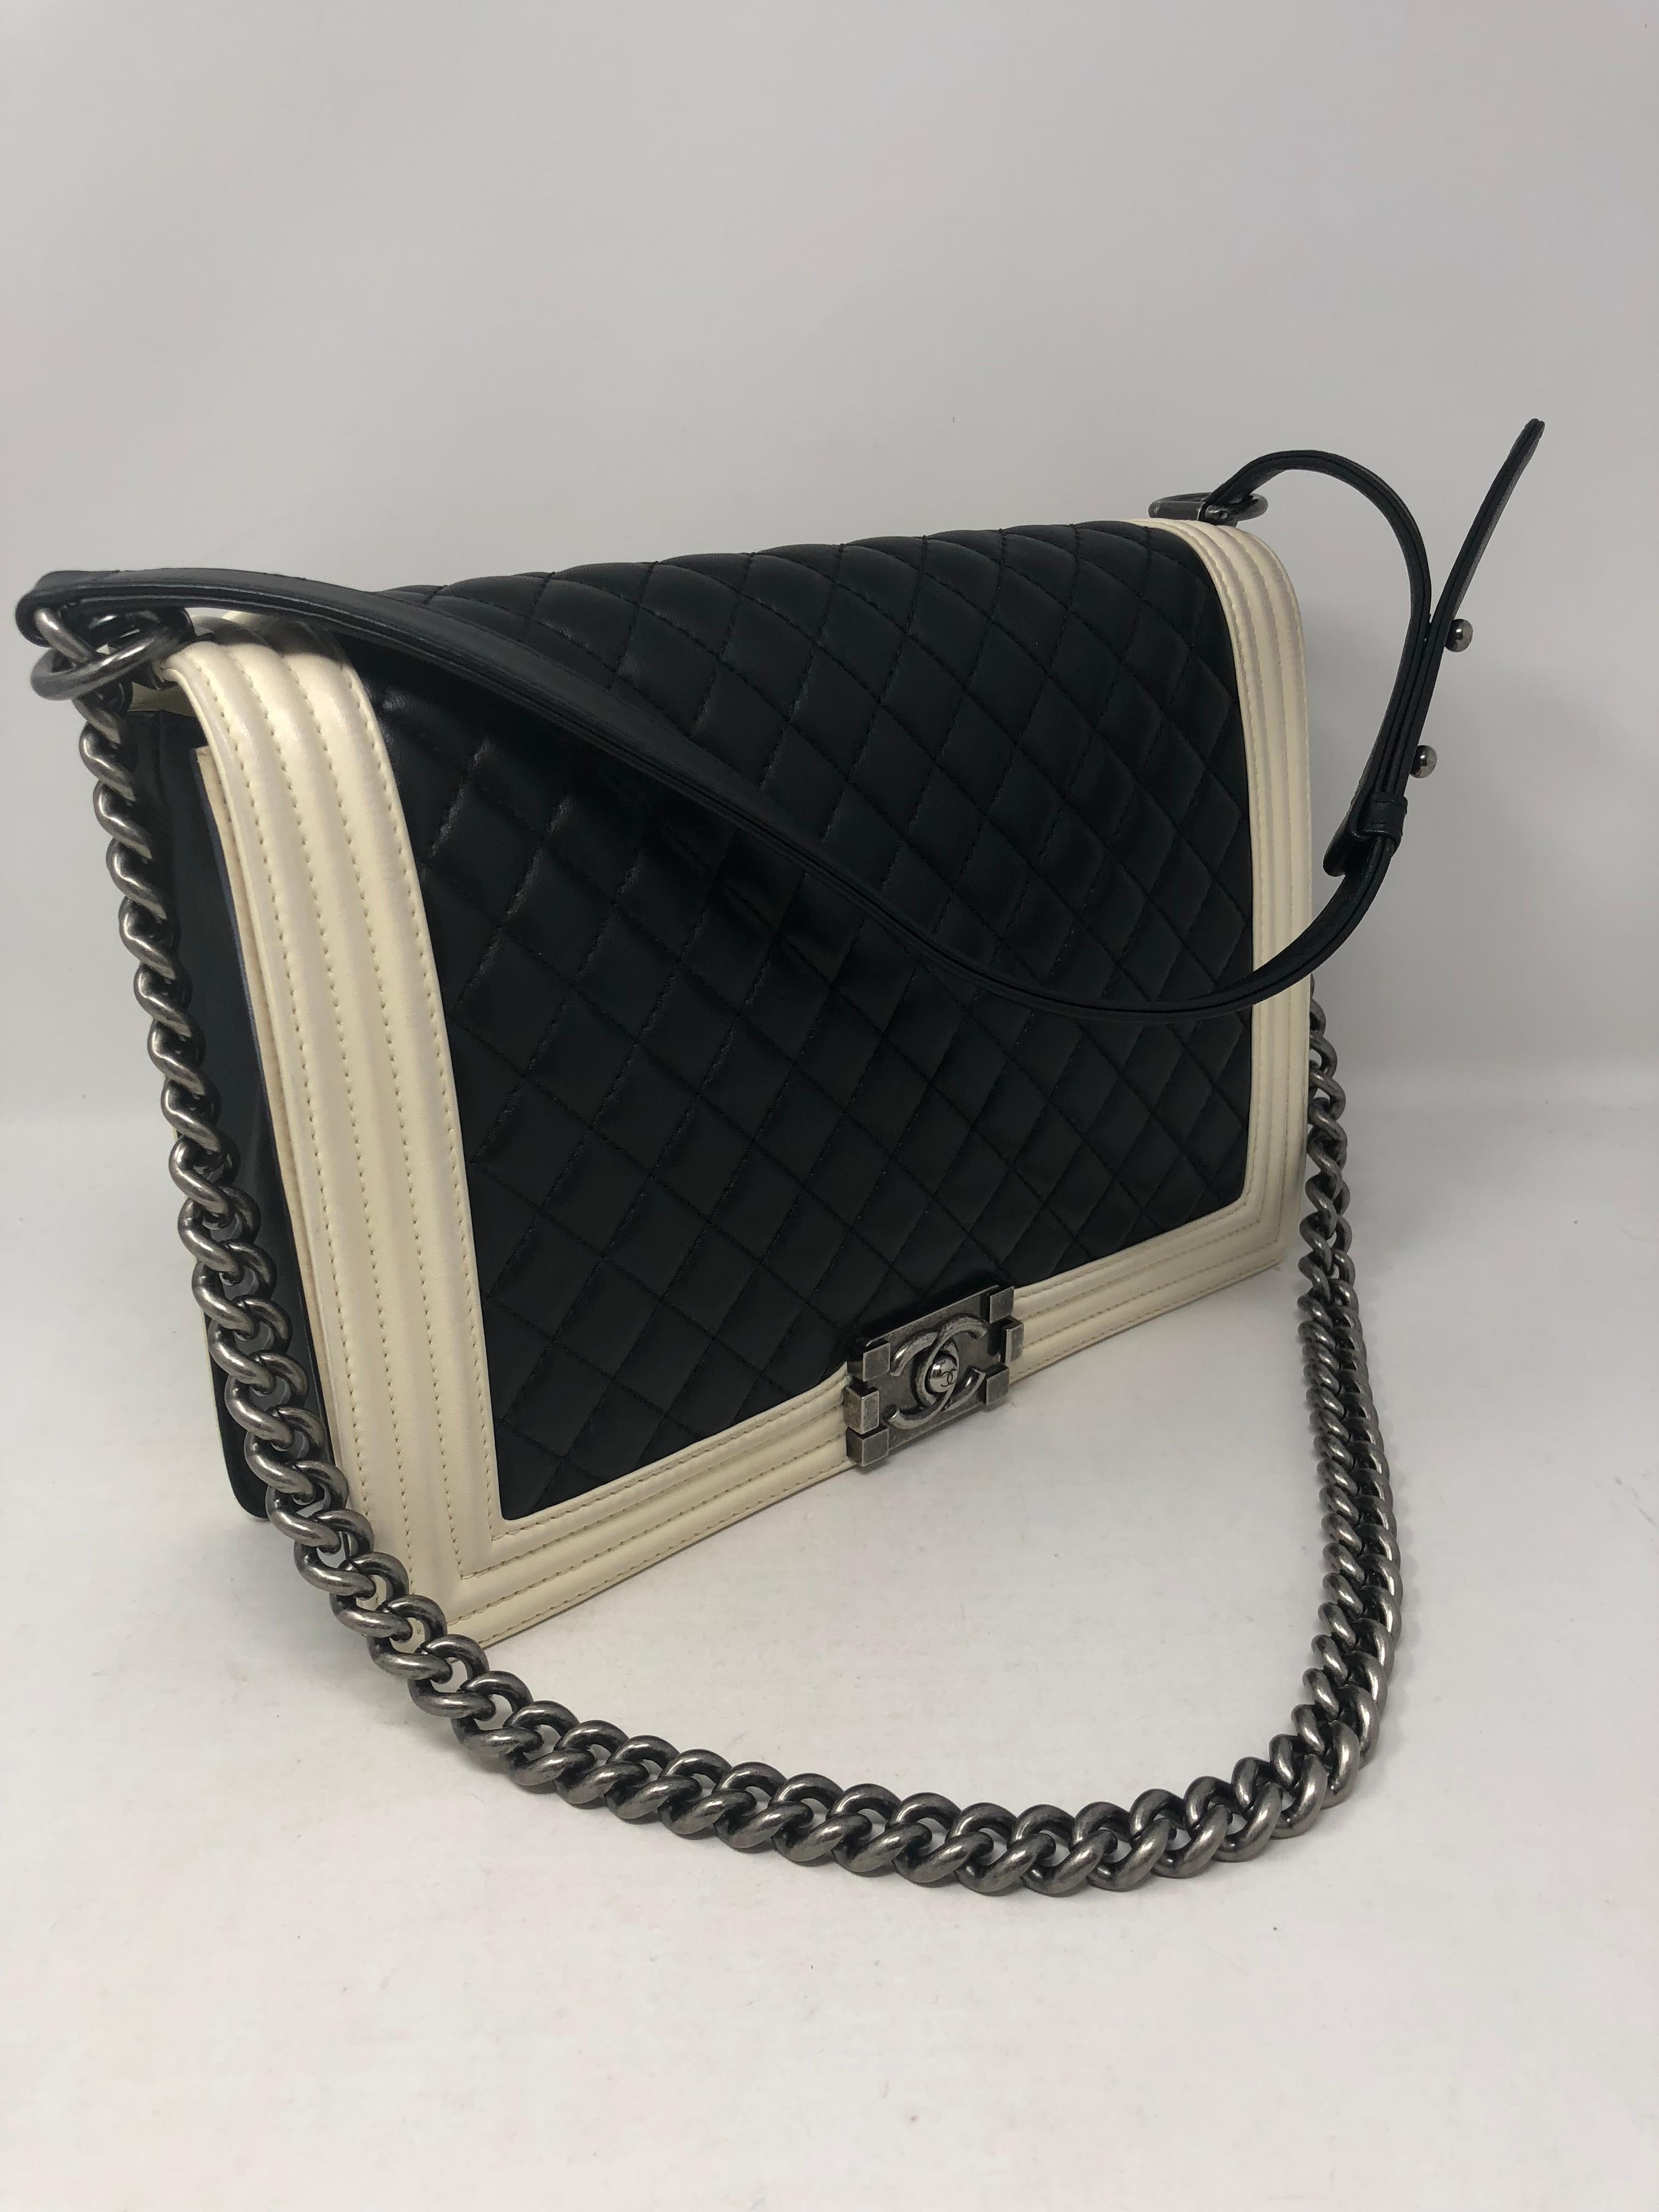 Women's or Men's Chanel Black and White Boy Large Bag